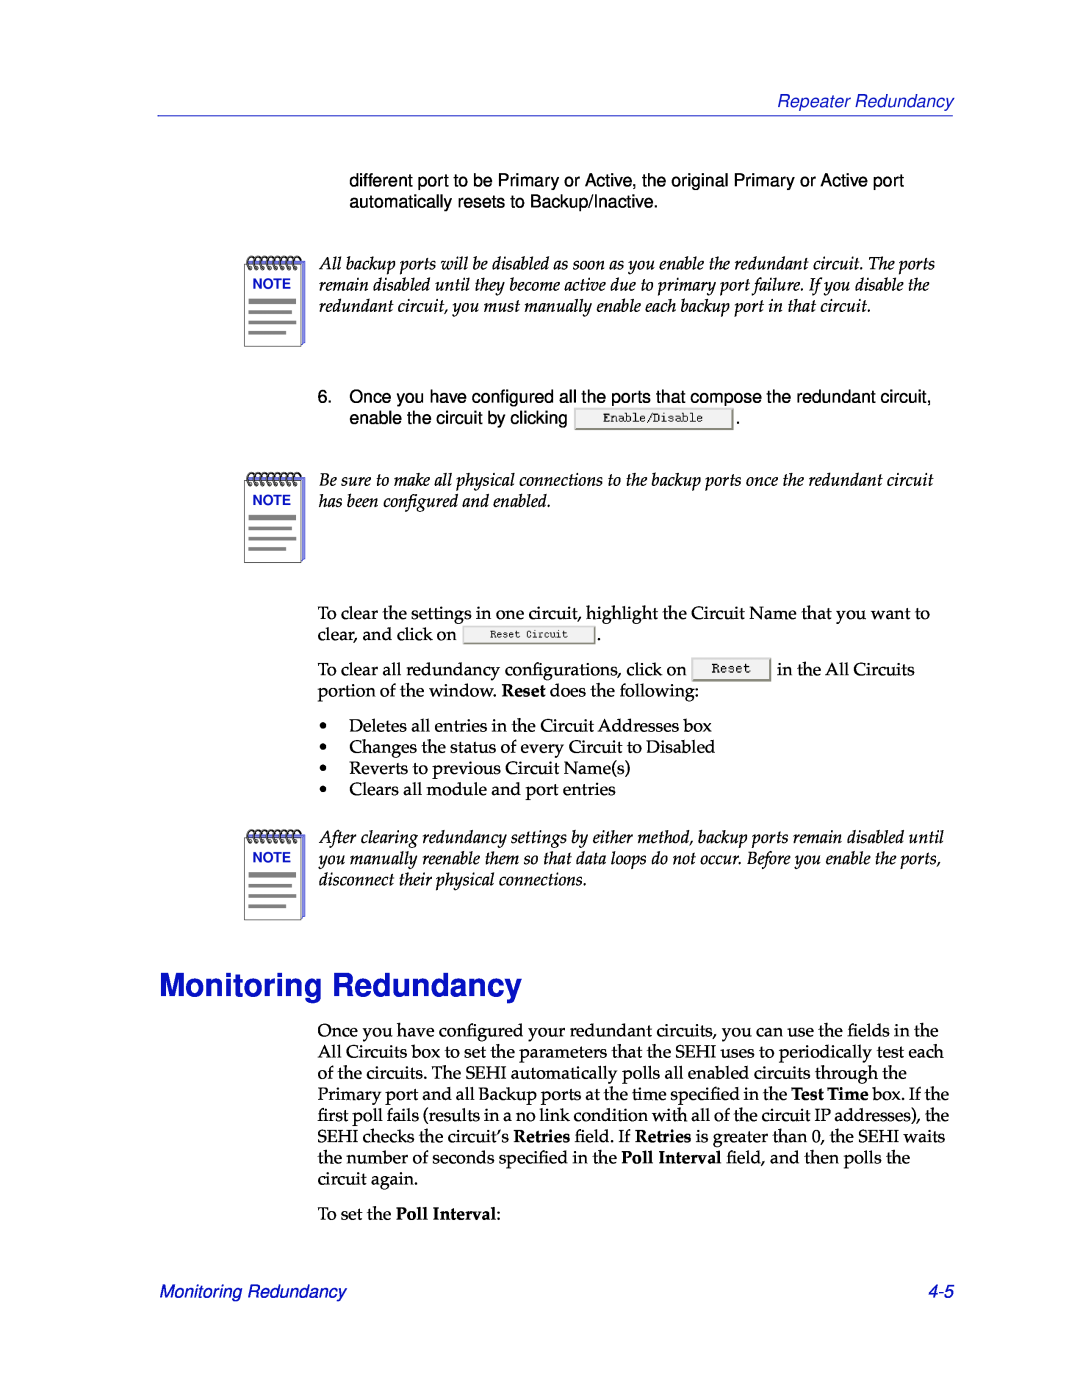 Cabletron Systems SEHI-22/24, SEHI-32/34 manual Monitoring Redundancy, To set the Poll Interval, Repeater Redundancy 